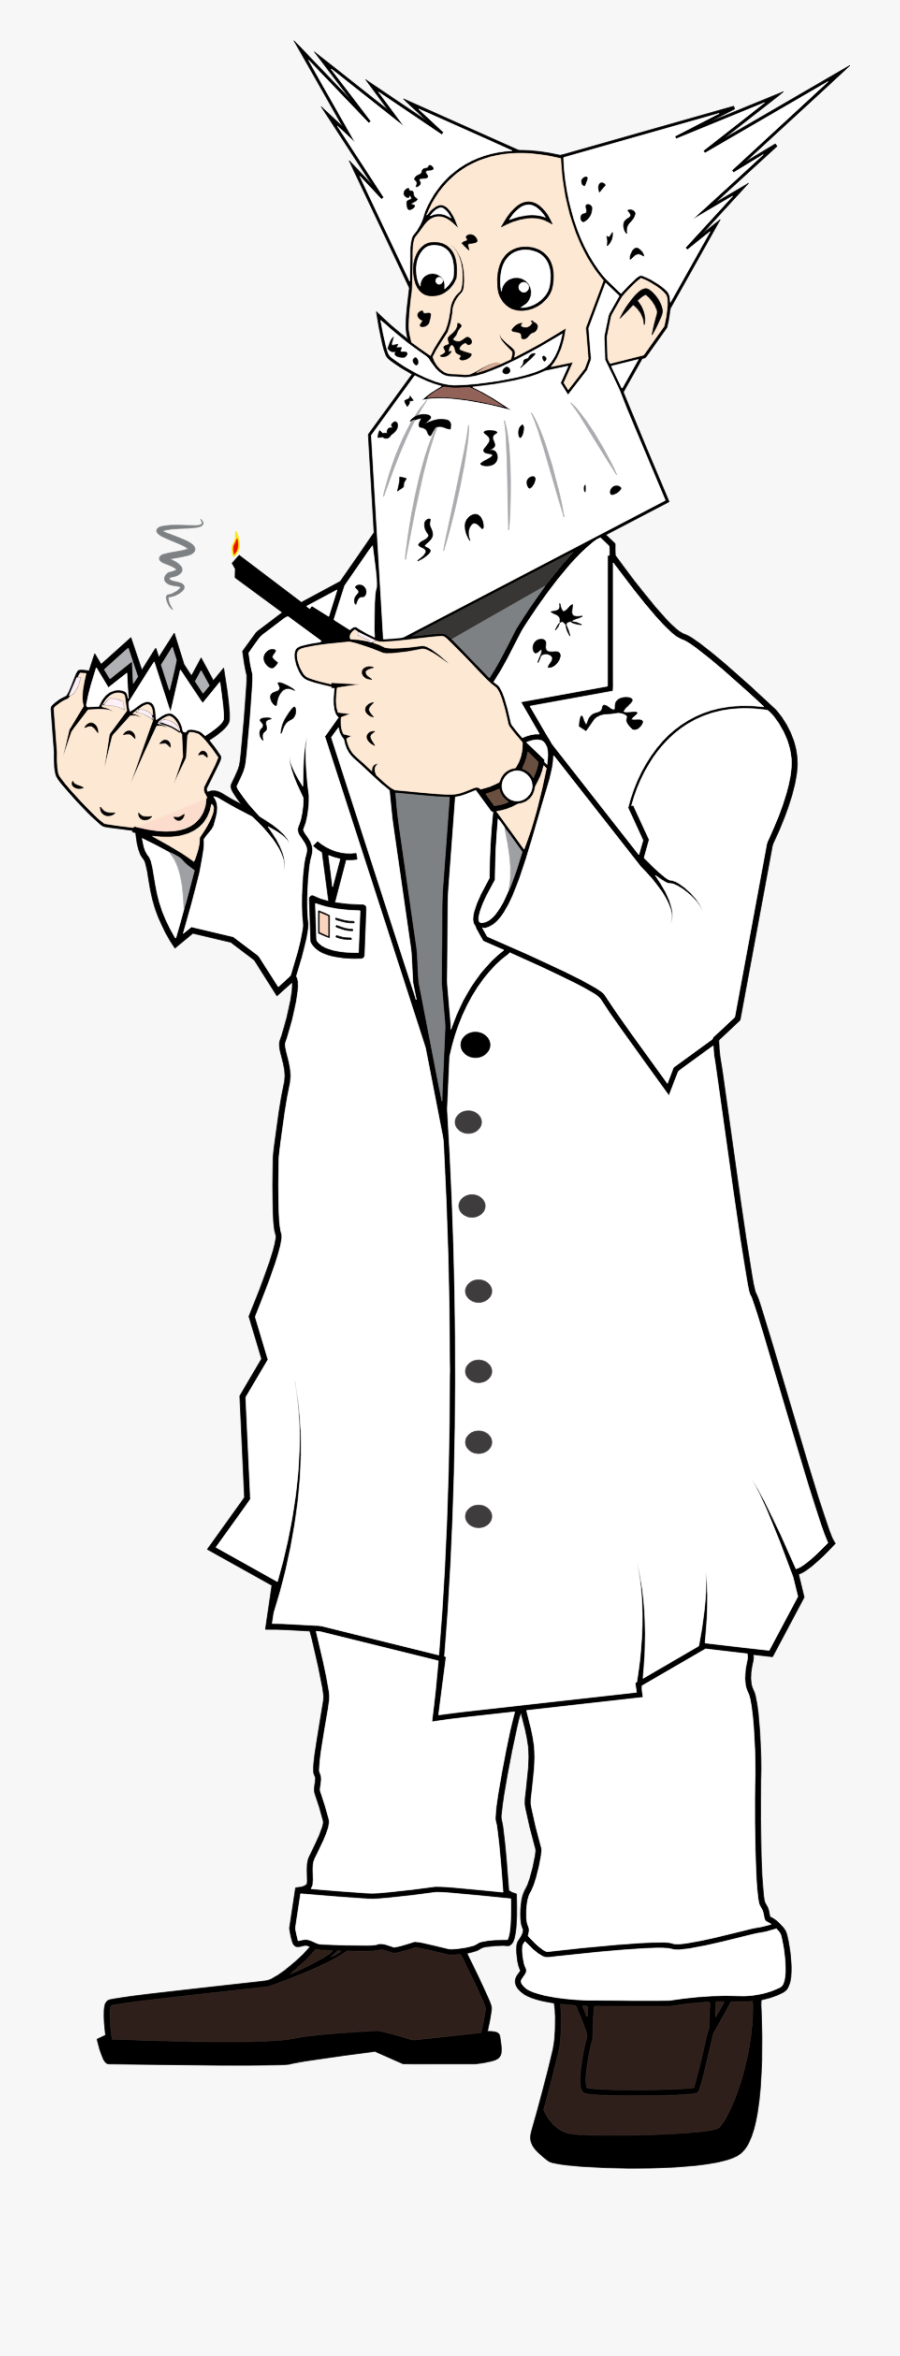 Barnacle Drawing Scientific - Drawing Of A Man In 2d, Transparent Clipart